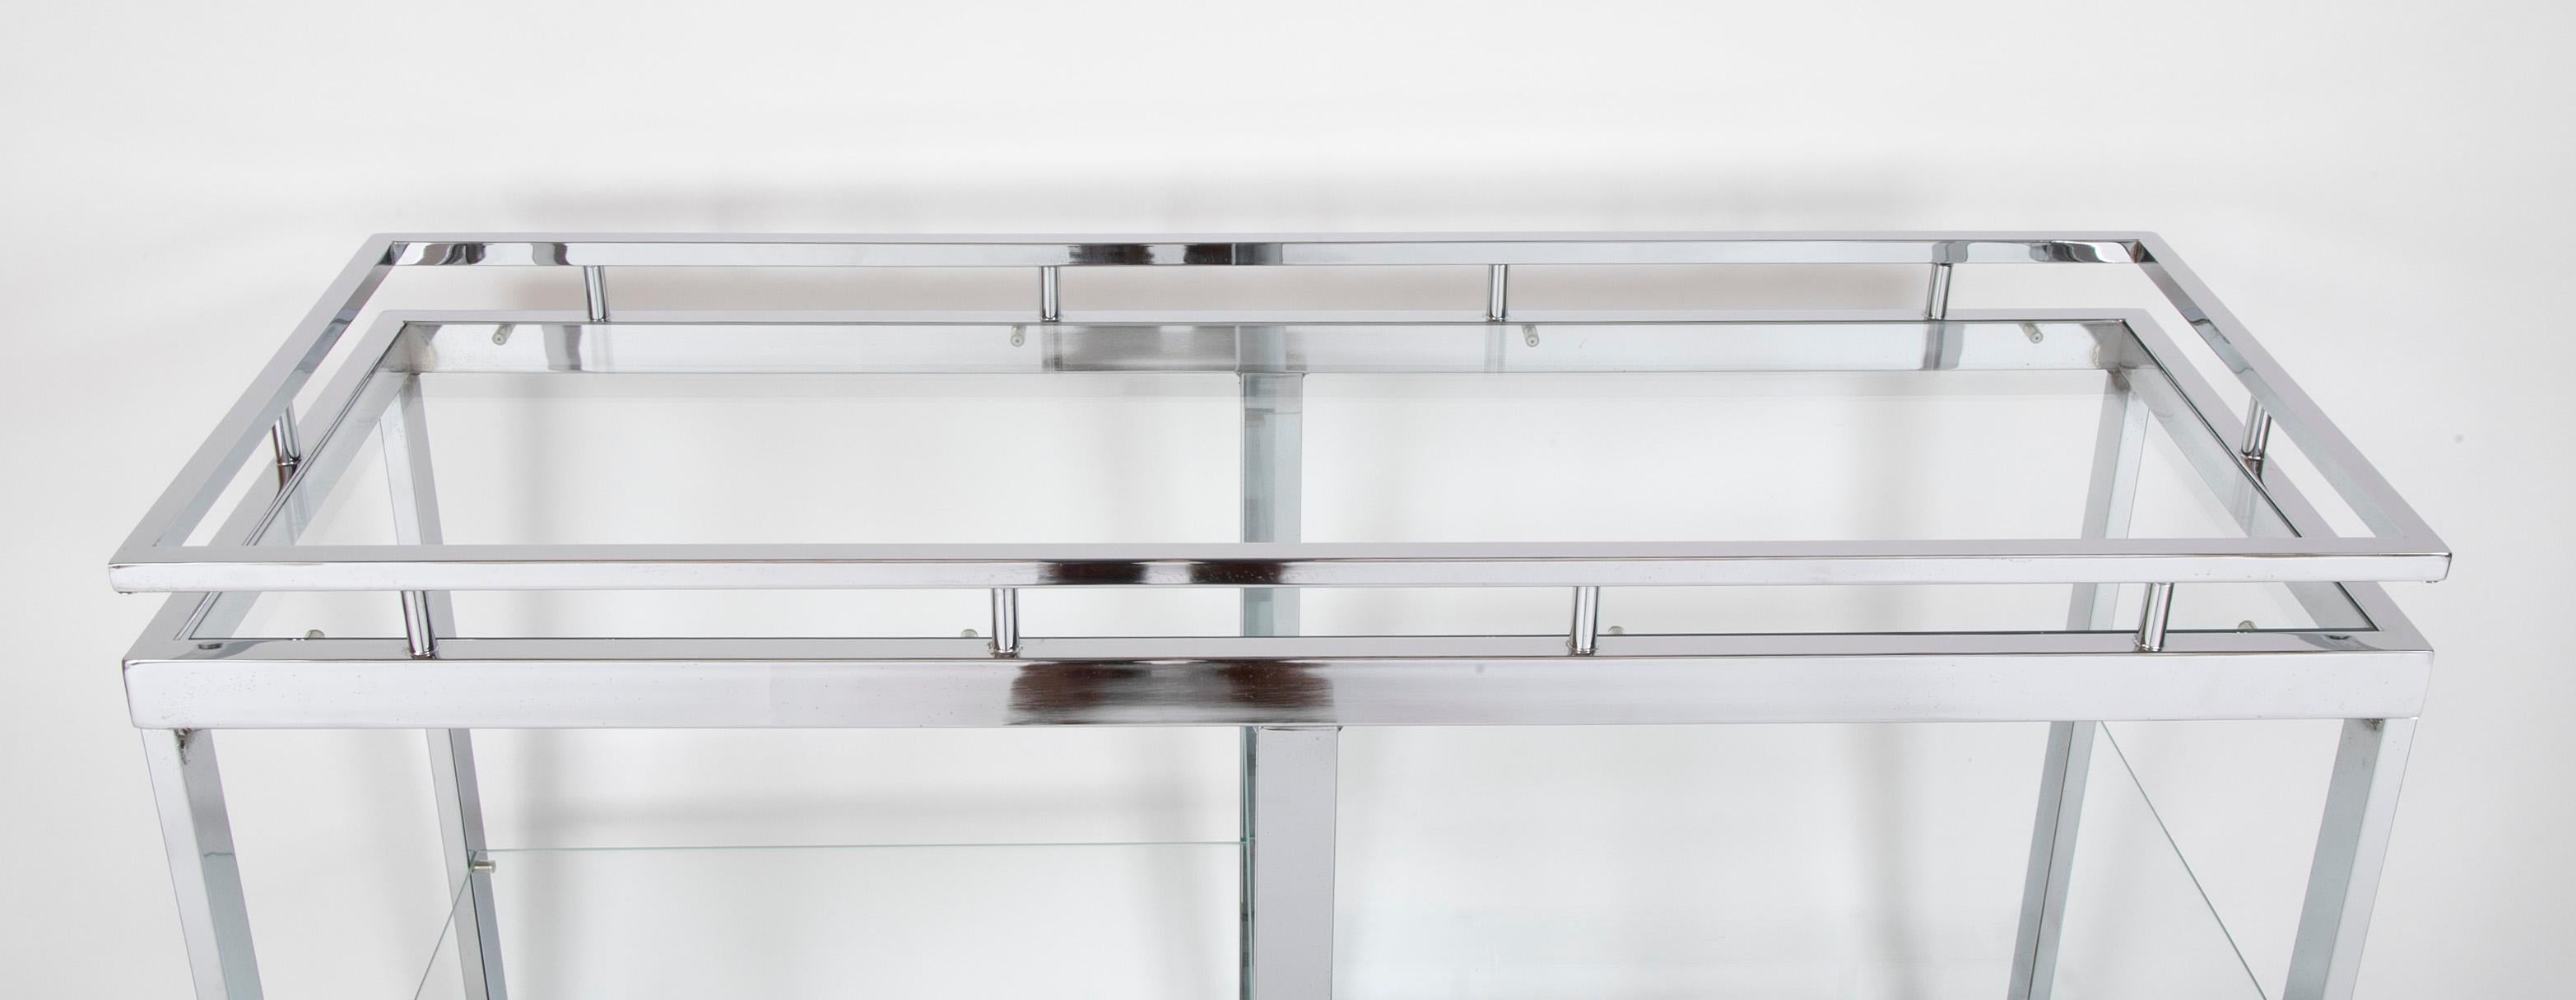 Late 20th Century Cocktail or Bar Cart of Chrome and Glass from the Design Institute of America